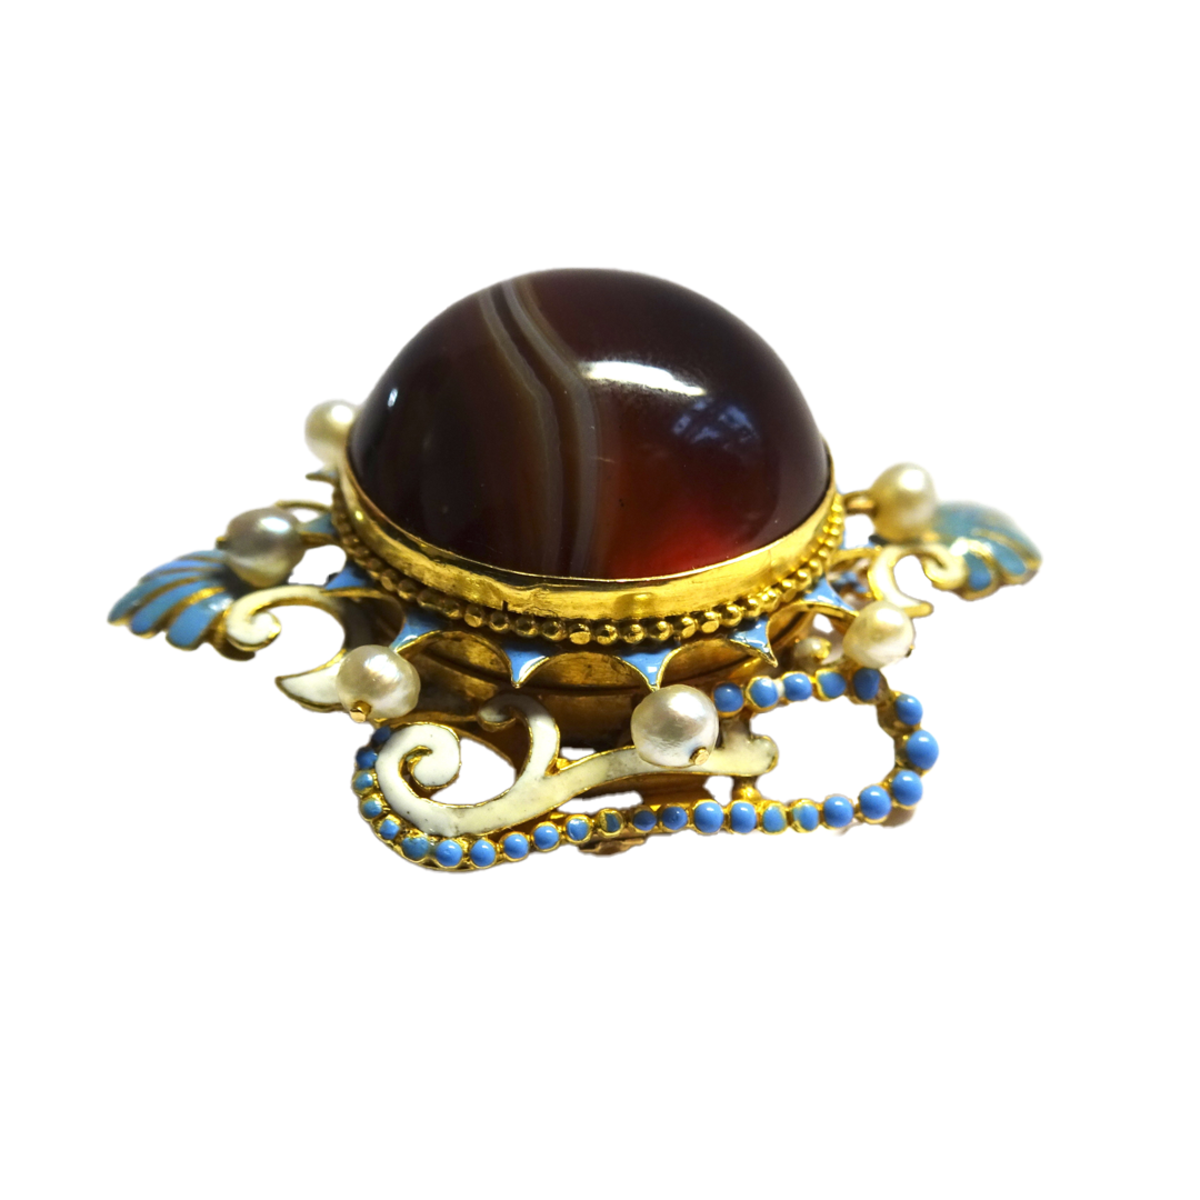 Antique 18KT Yellow Gold Carnelian Agate, Enamel & Natural Pearl Brooch profile